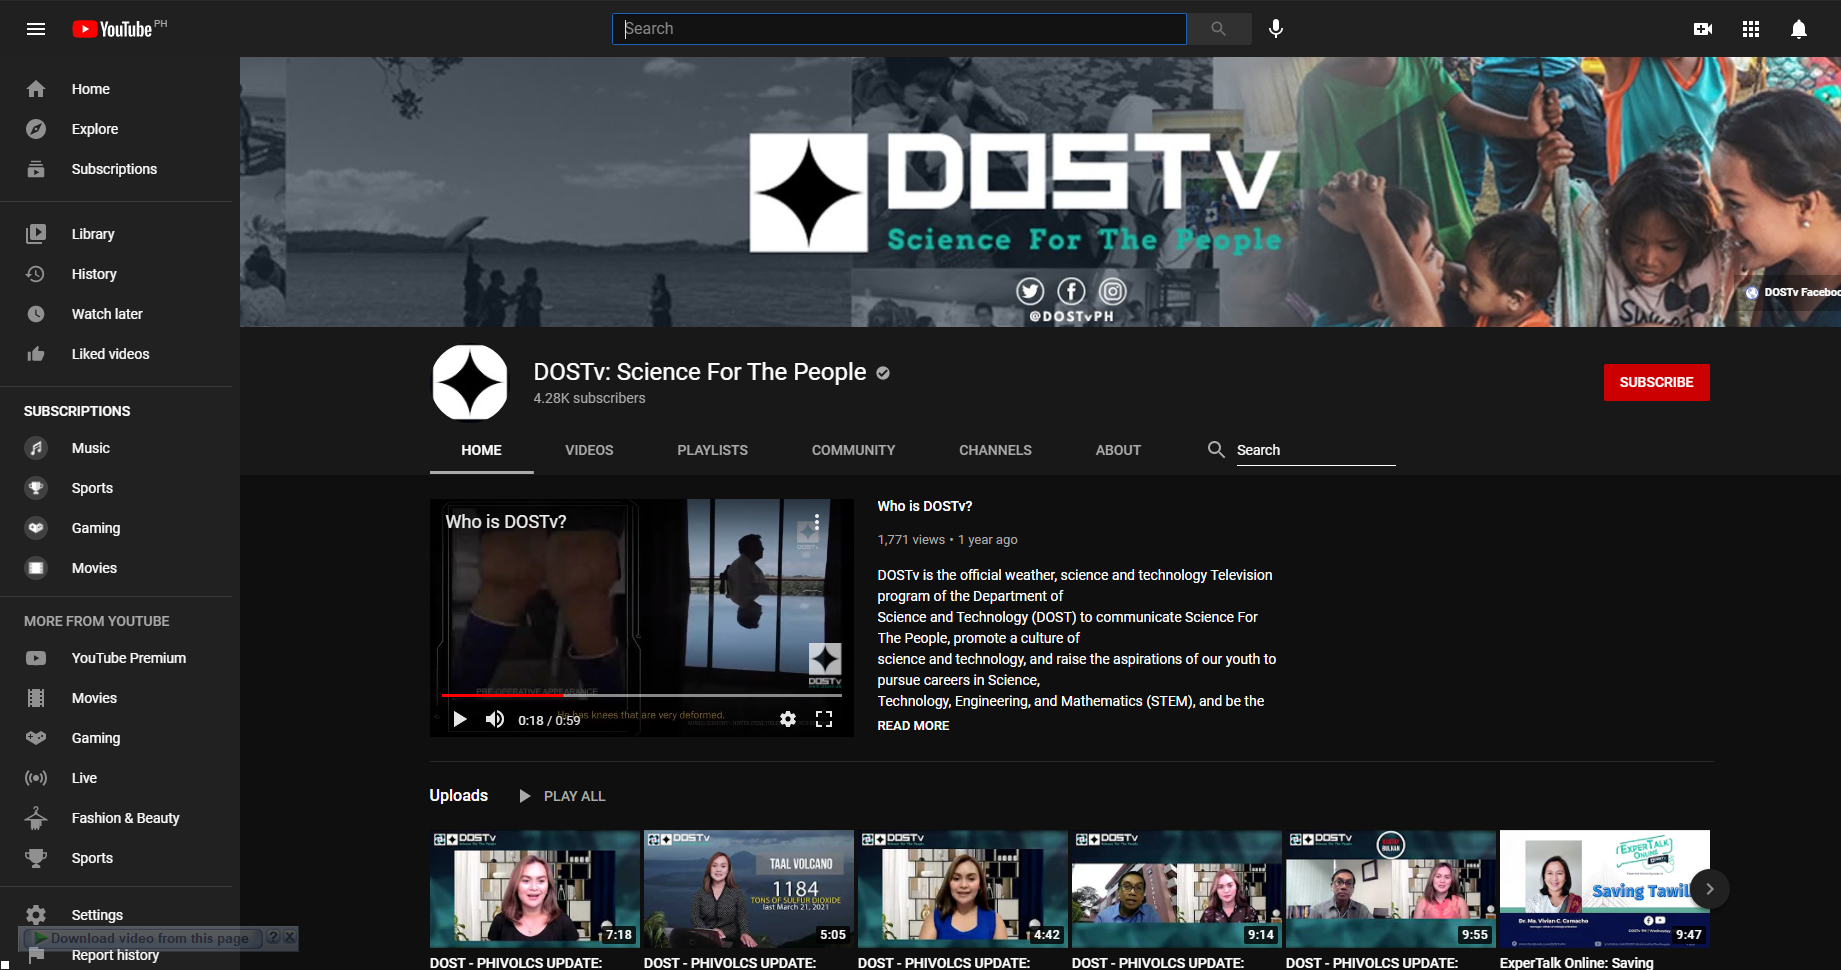 Follow us on Youtube! DOSTv: Science For The People image